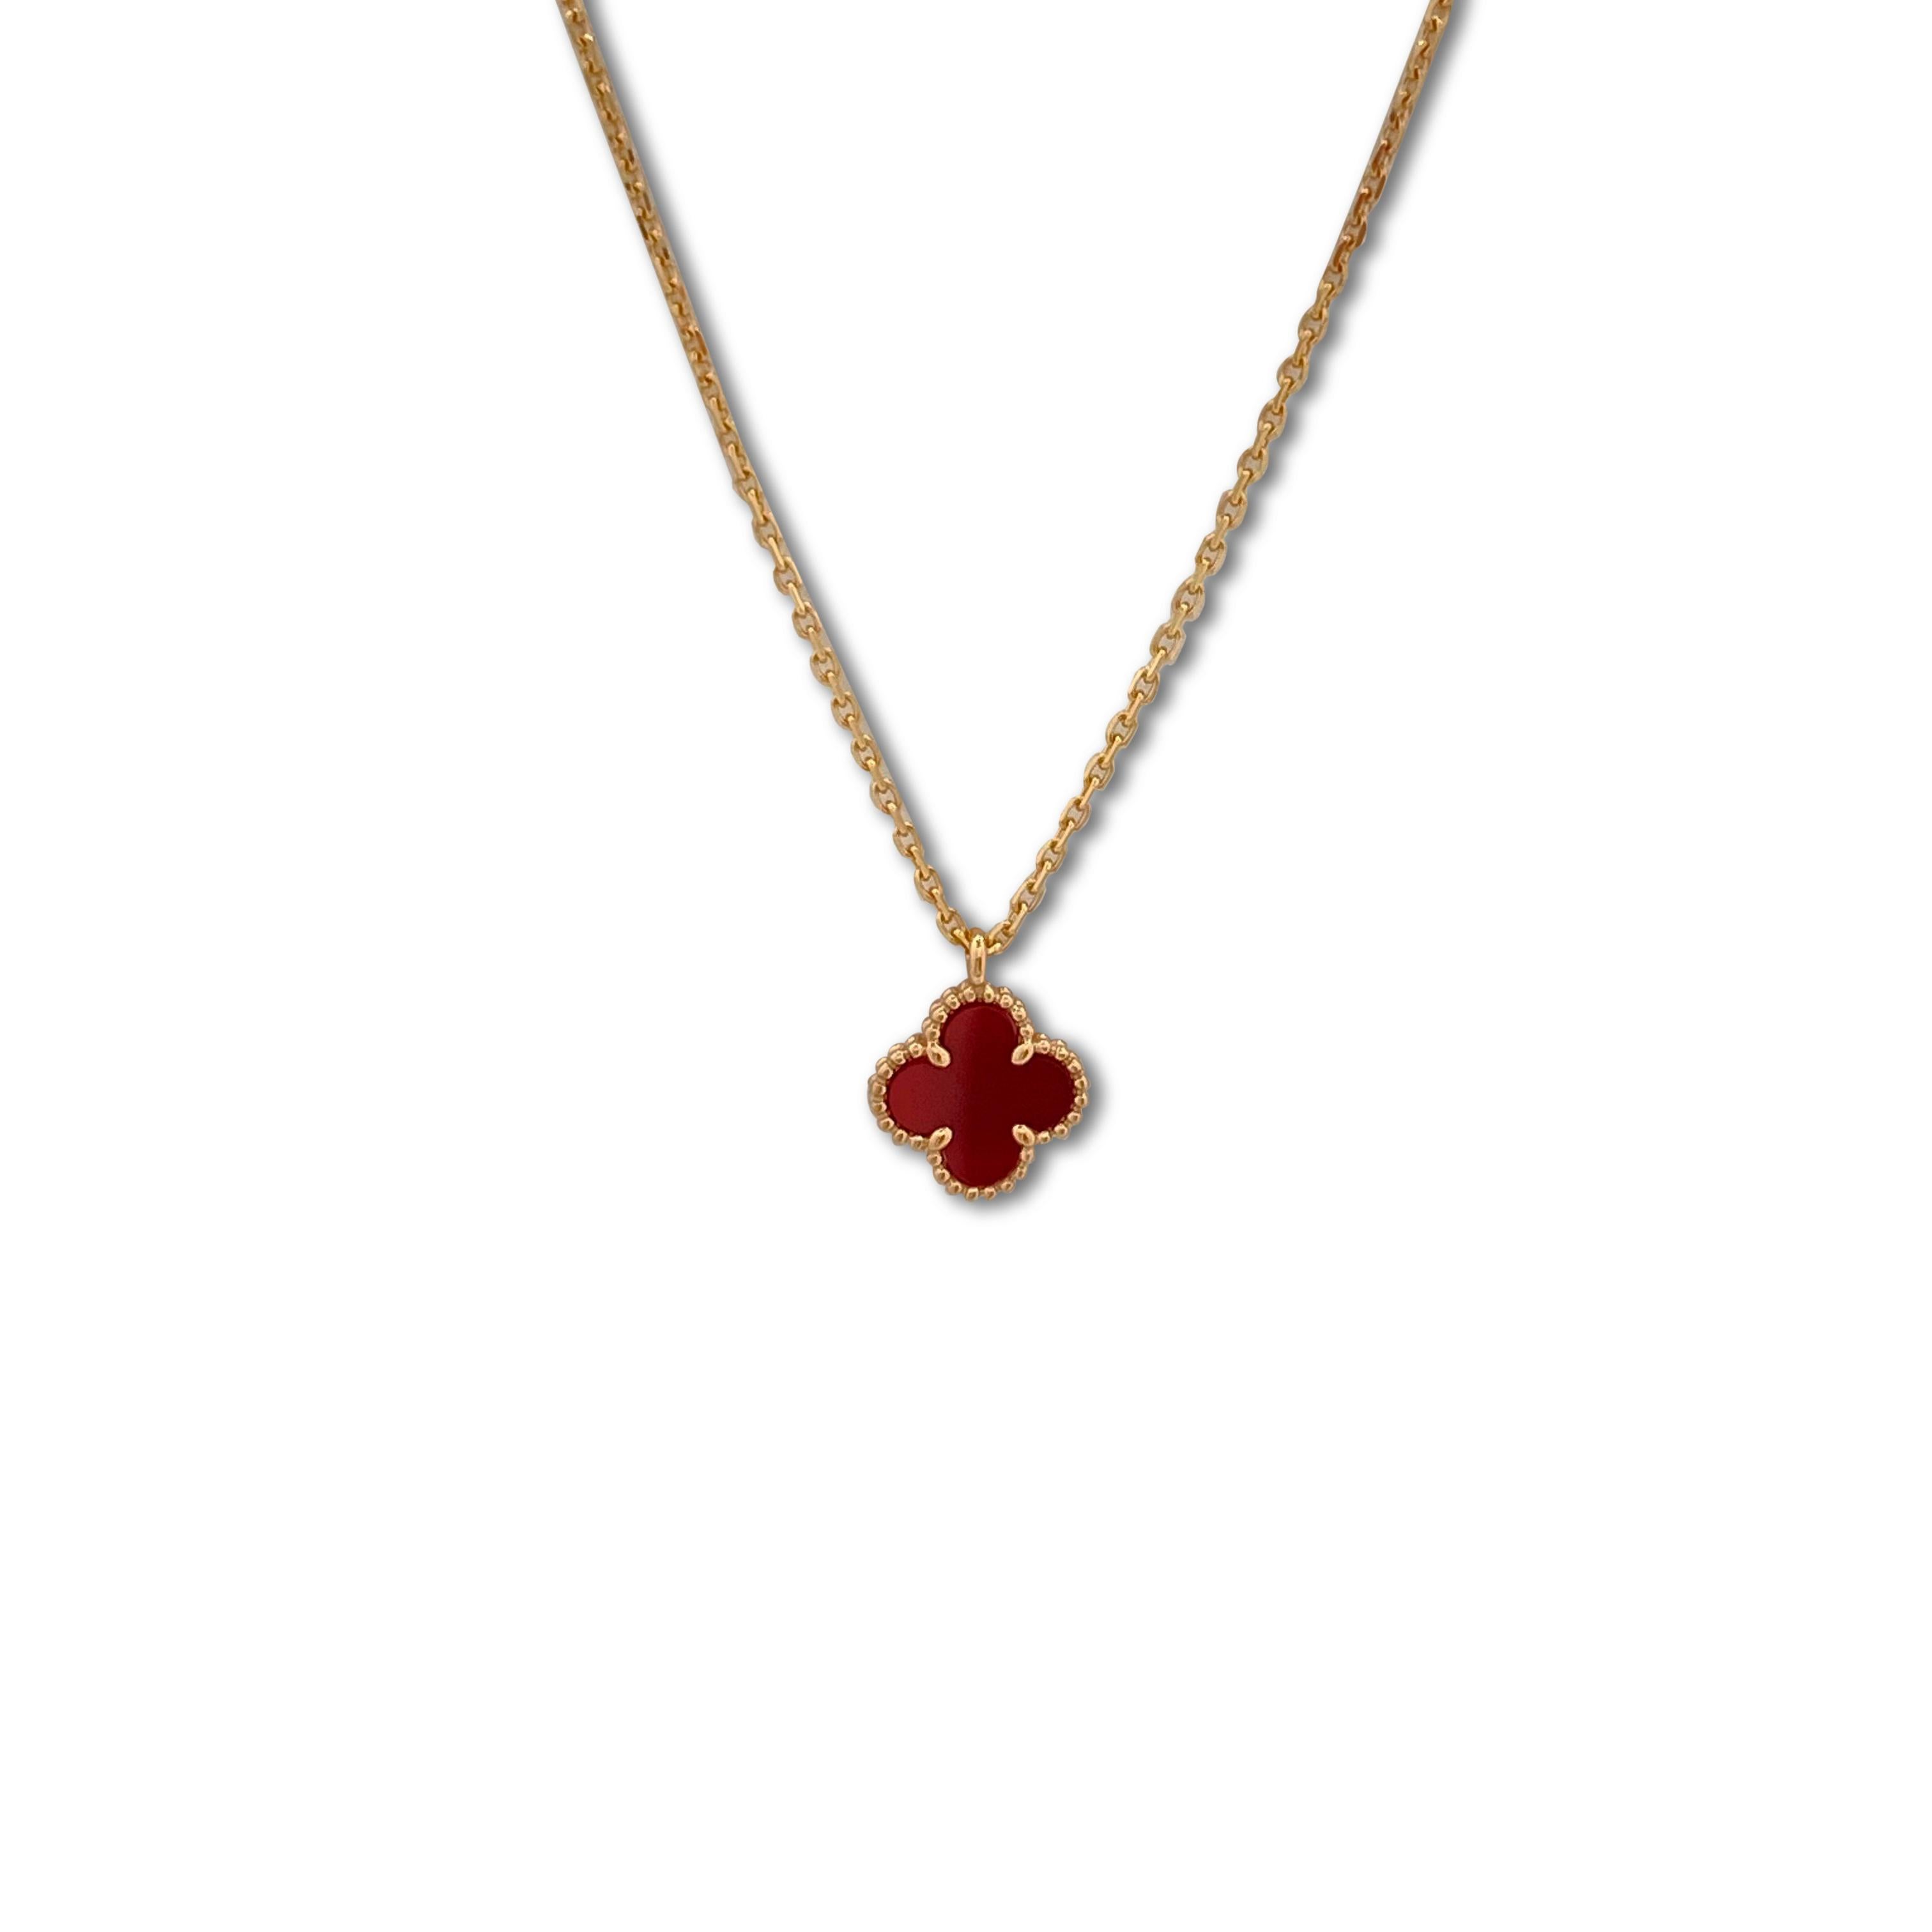 Authentic Van Cleef & Arpels Sweet Alhambra pendant necklace crafted in 18 karat rose gold and featuring a single clover-inspired motif pendant in carnelian. The necklace measures 16.25 inches in total length with an adjustable chain. The pendant